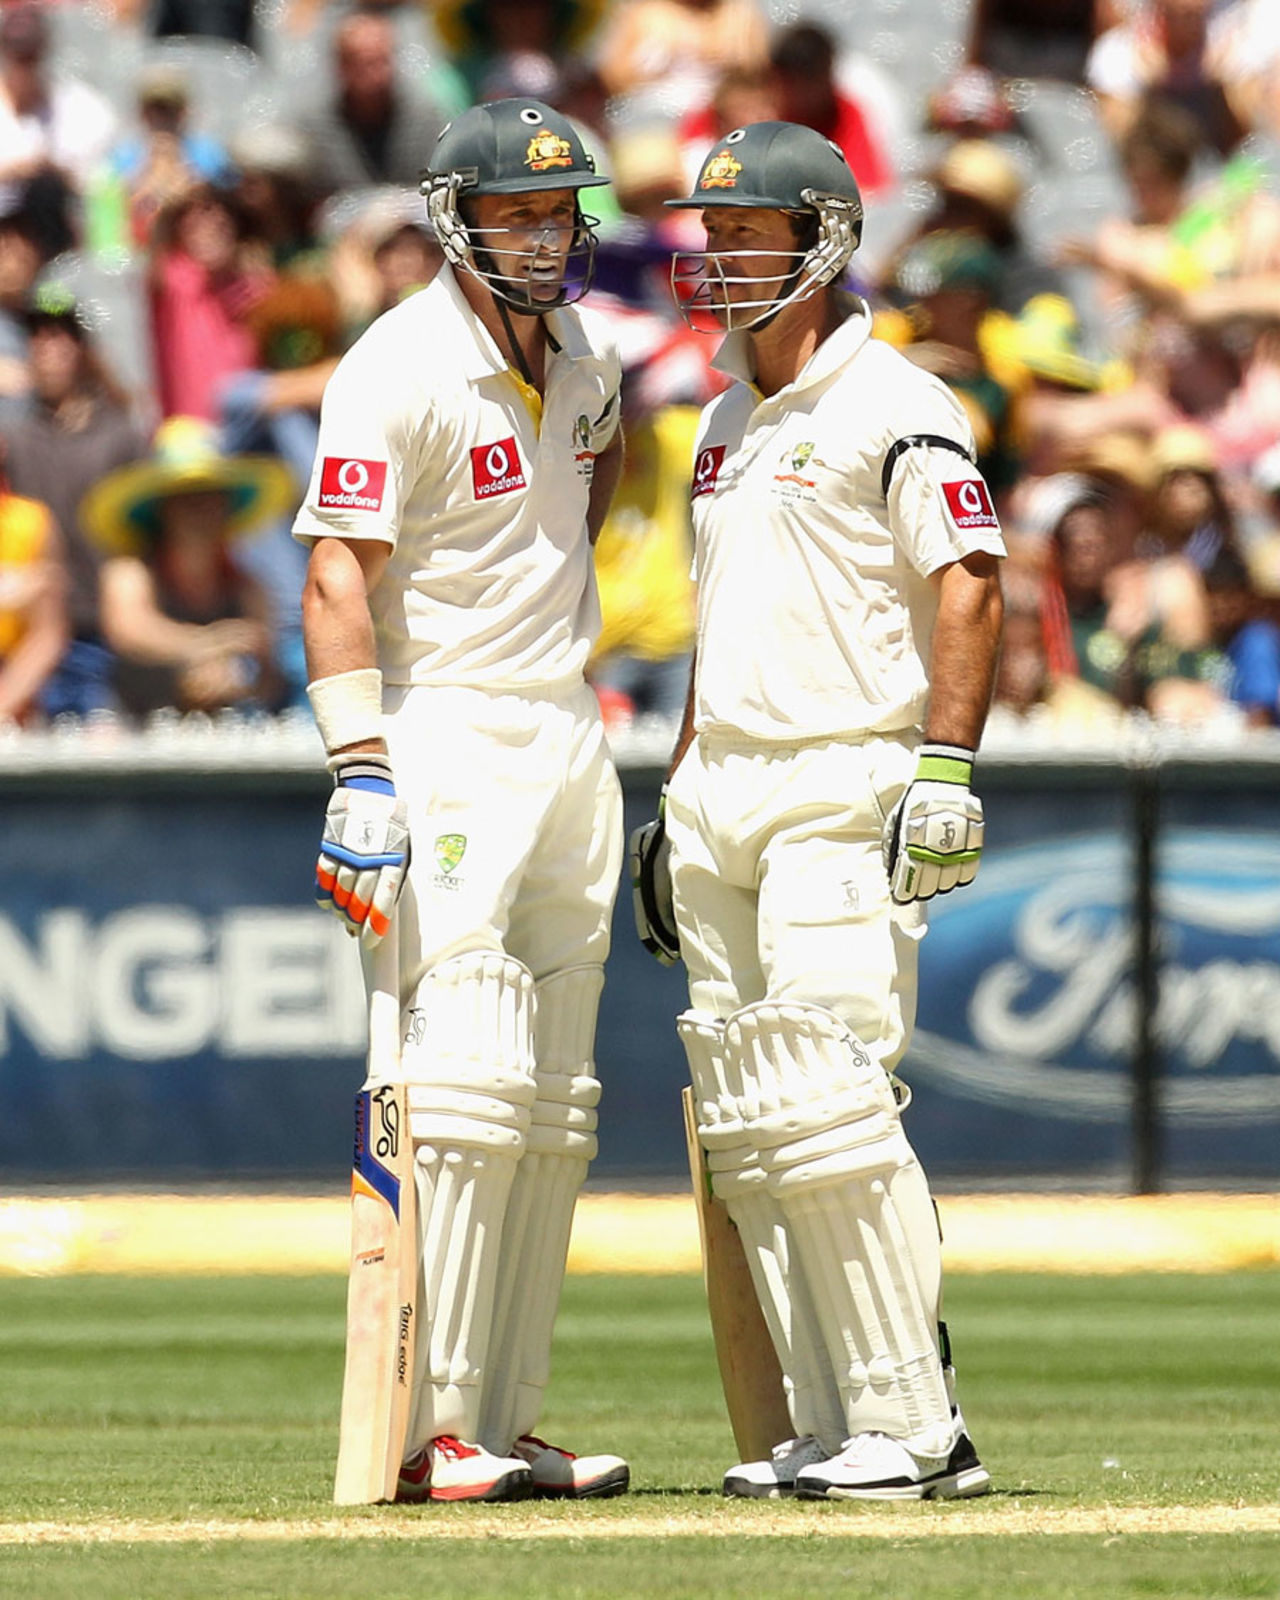 Michael Hussey and Ricky Ponting steadied Australia, Australia v India, 1st Test, Melbourne, 3rd day, December 28, 2011